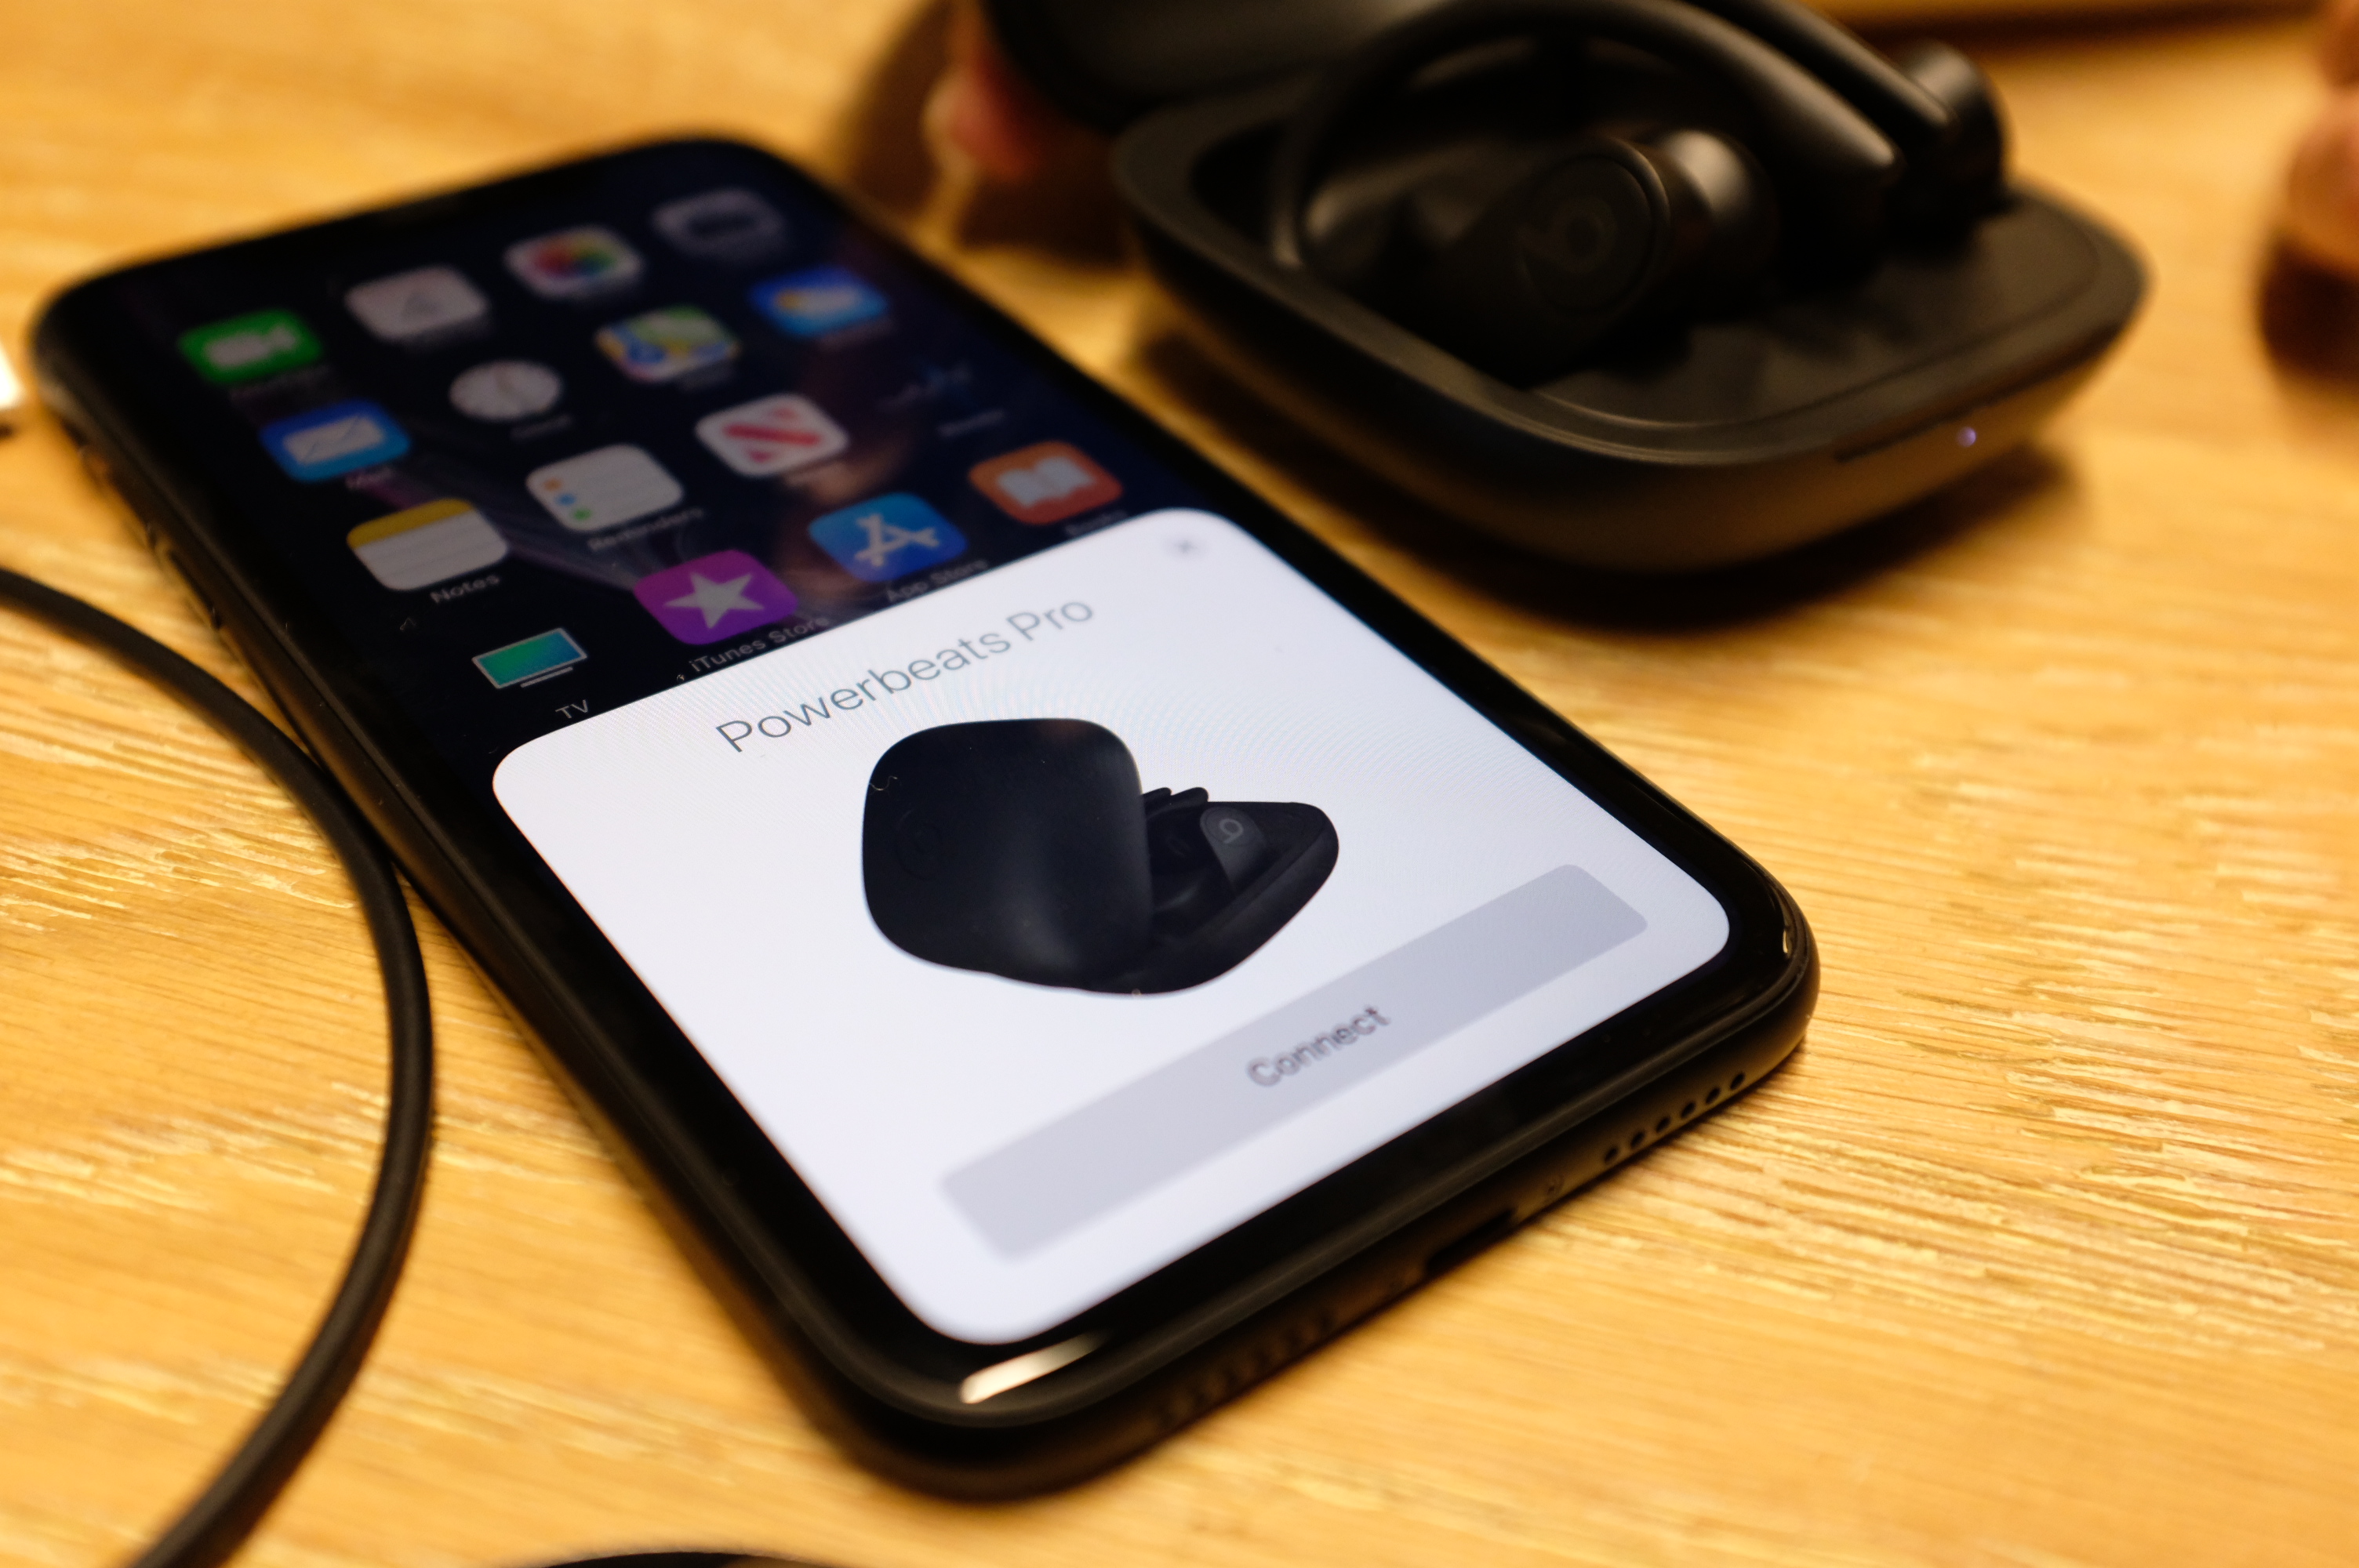 connect powerbeats to phone